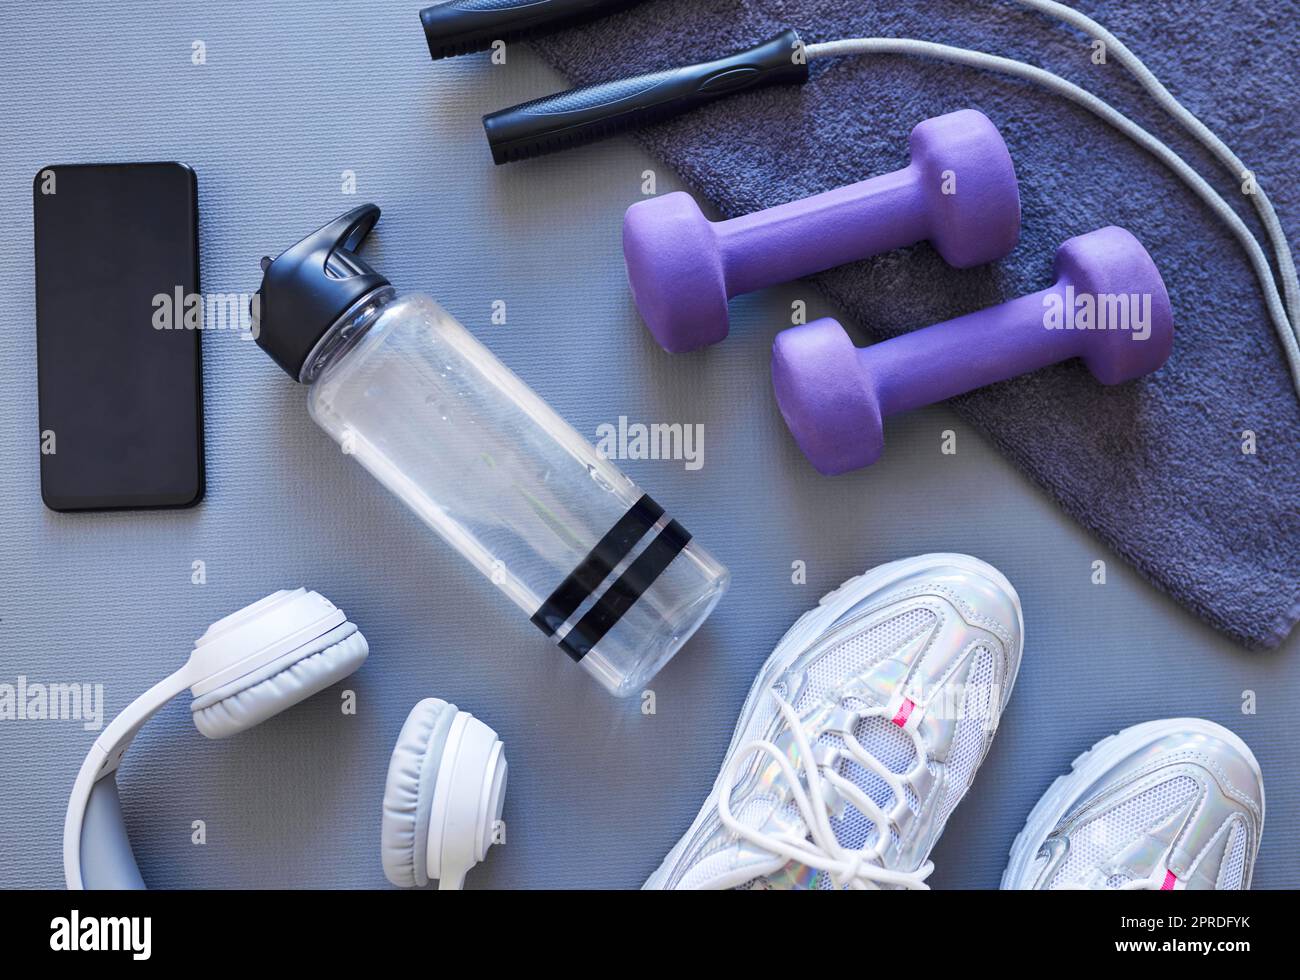 The self improvement starter pack. Studio shot of a variety of workout equipment against a grey background. Stock Photo